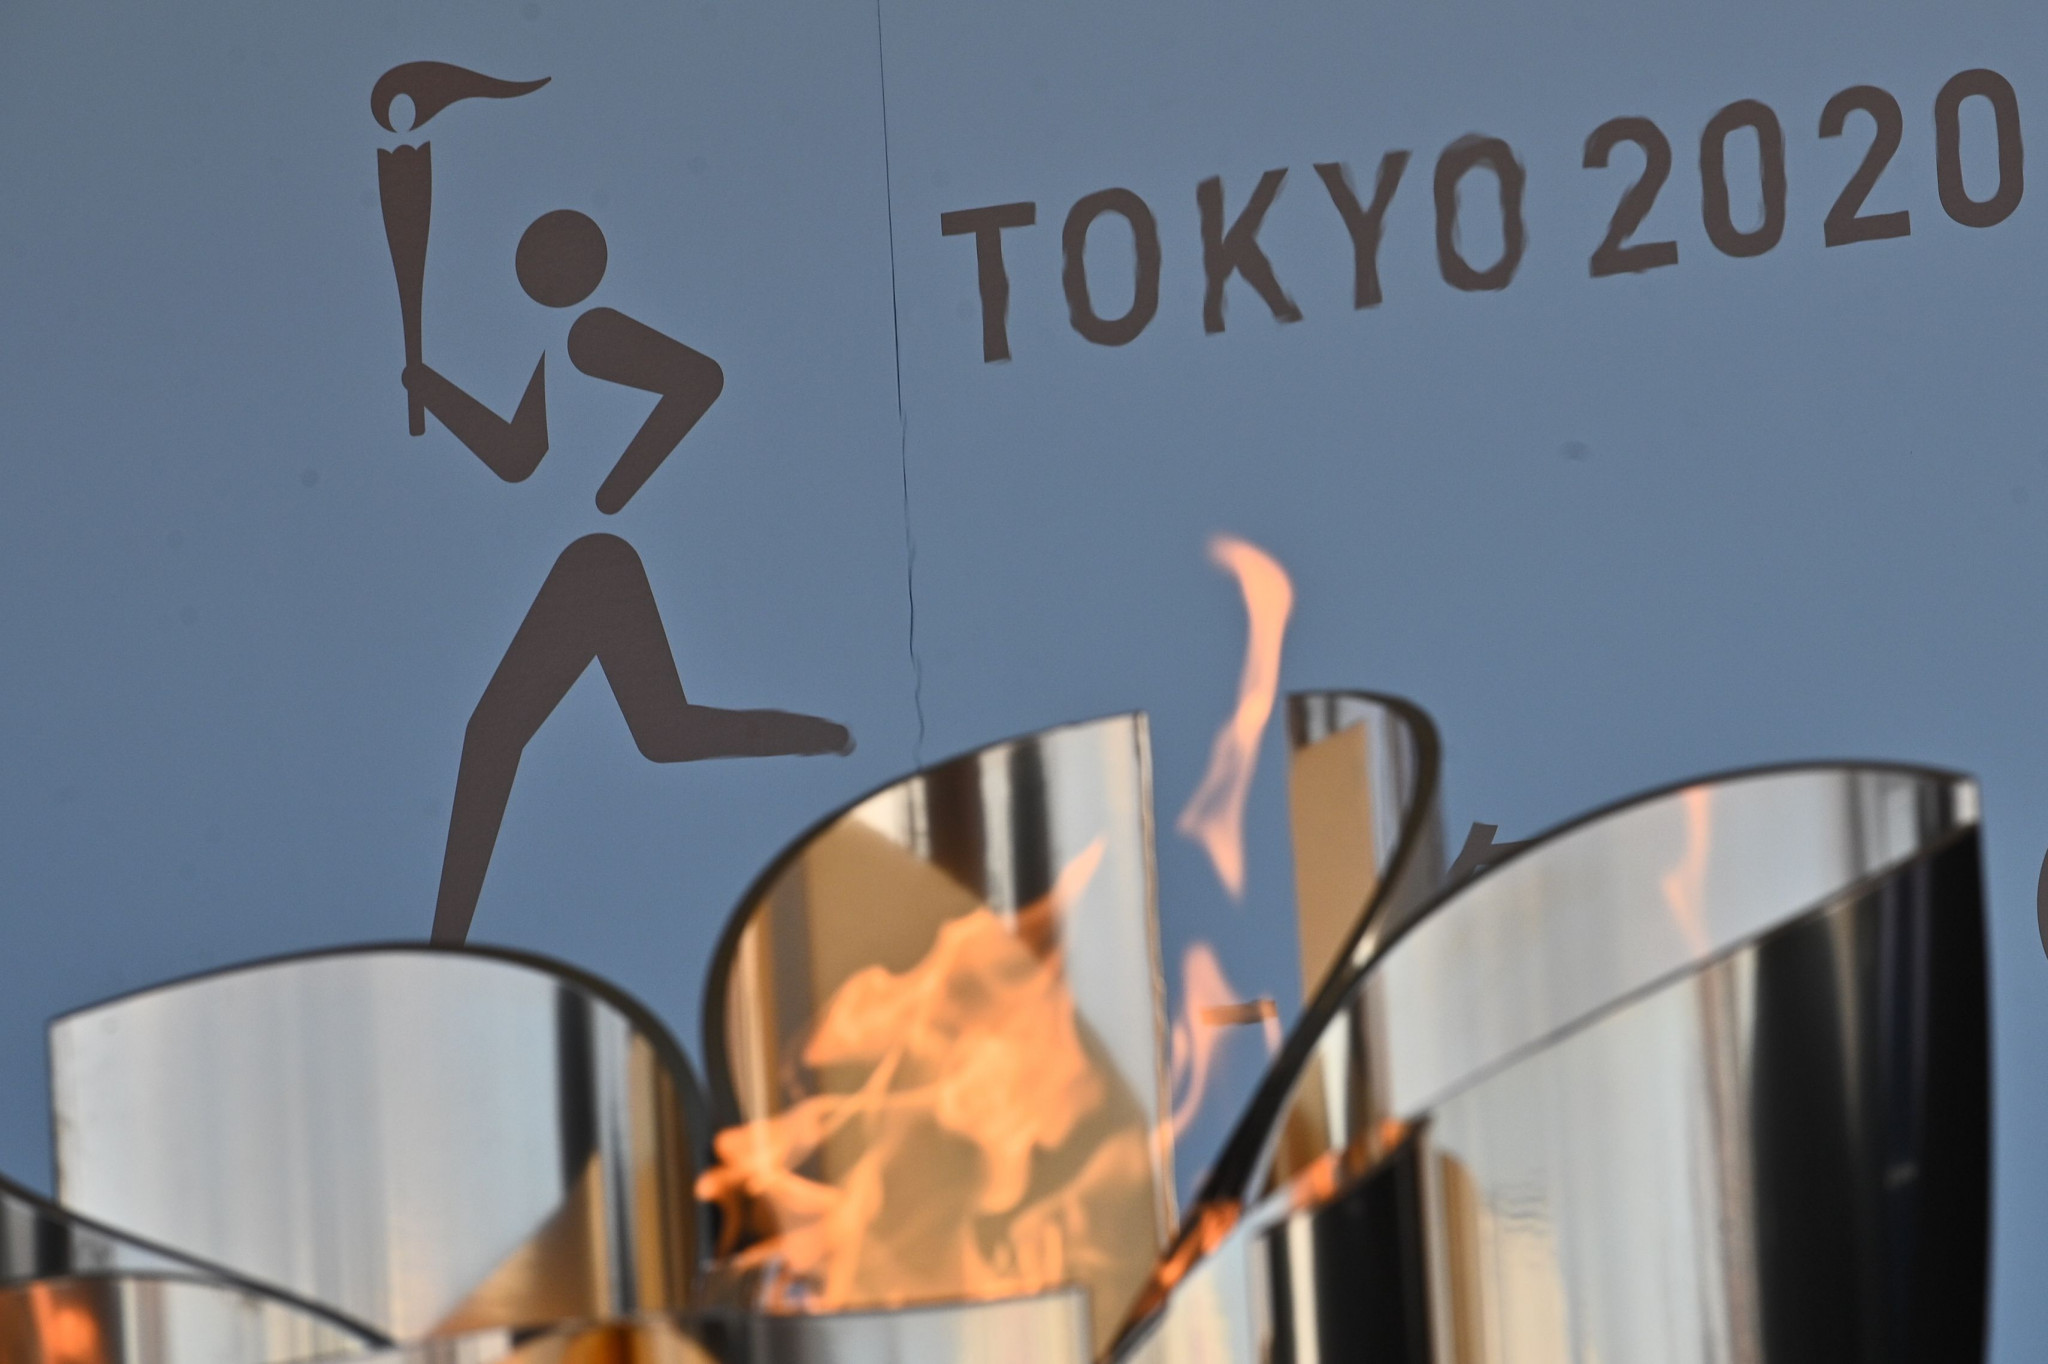 Organisers of the Tokyo 2020 Olympic and Paralympic Games are considering a streamlined version of the Torch Relay to cut costs ©Getty Images